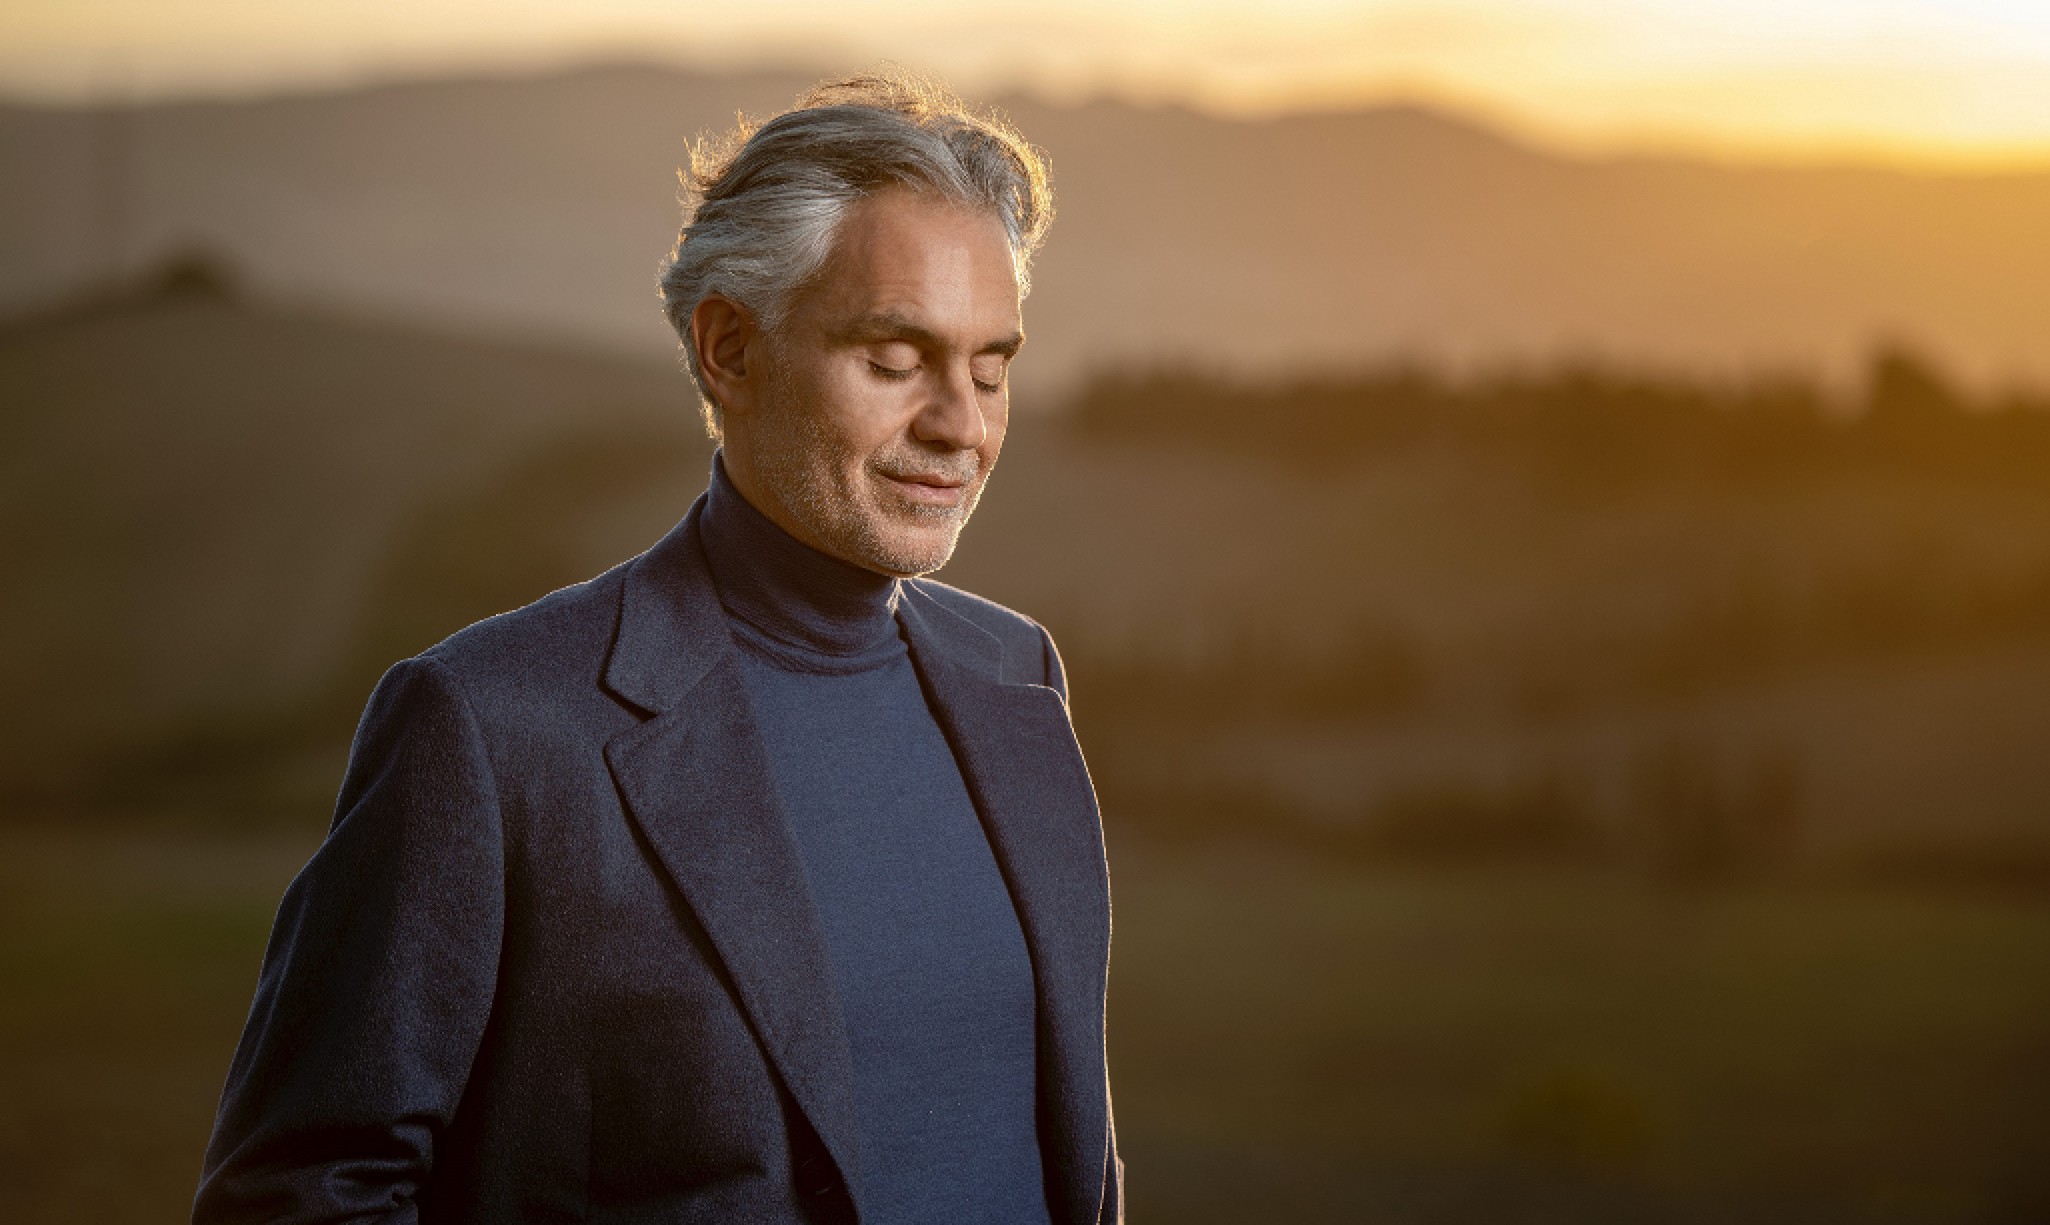 Andrea Bocelli on the joy of making a Christmas album with two of